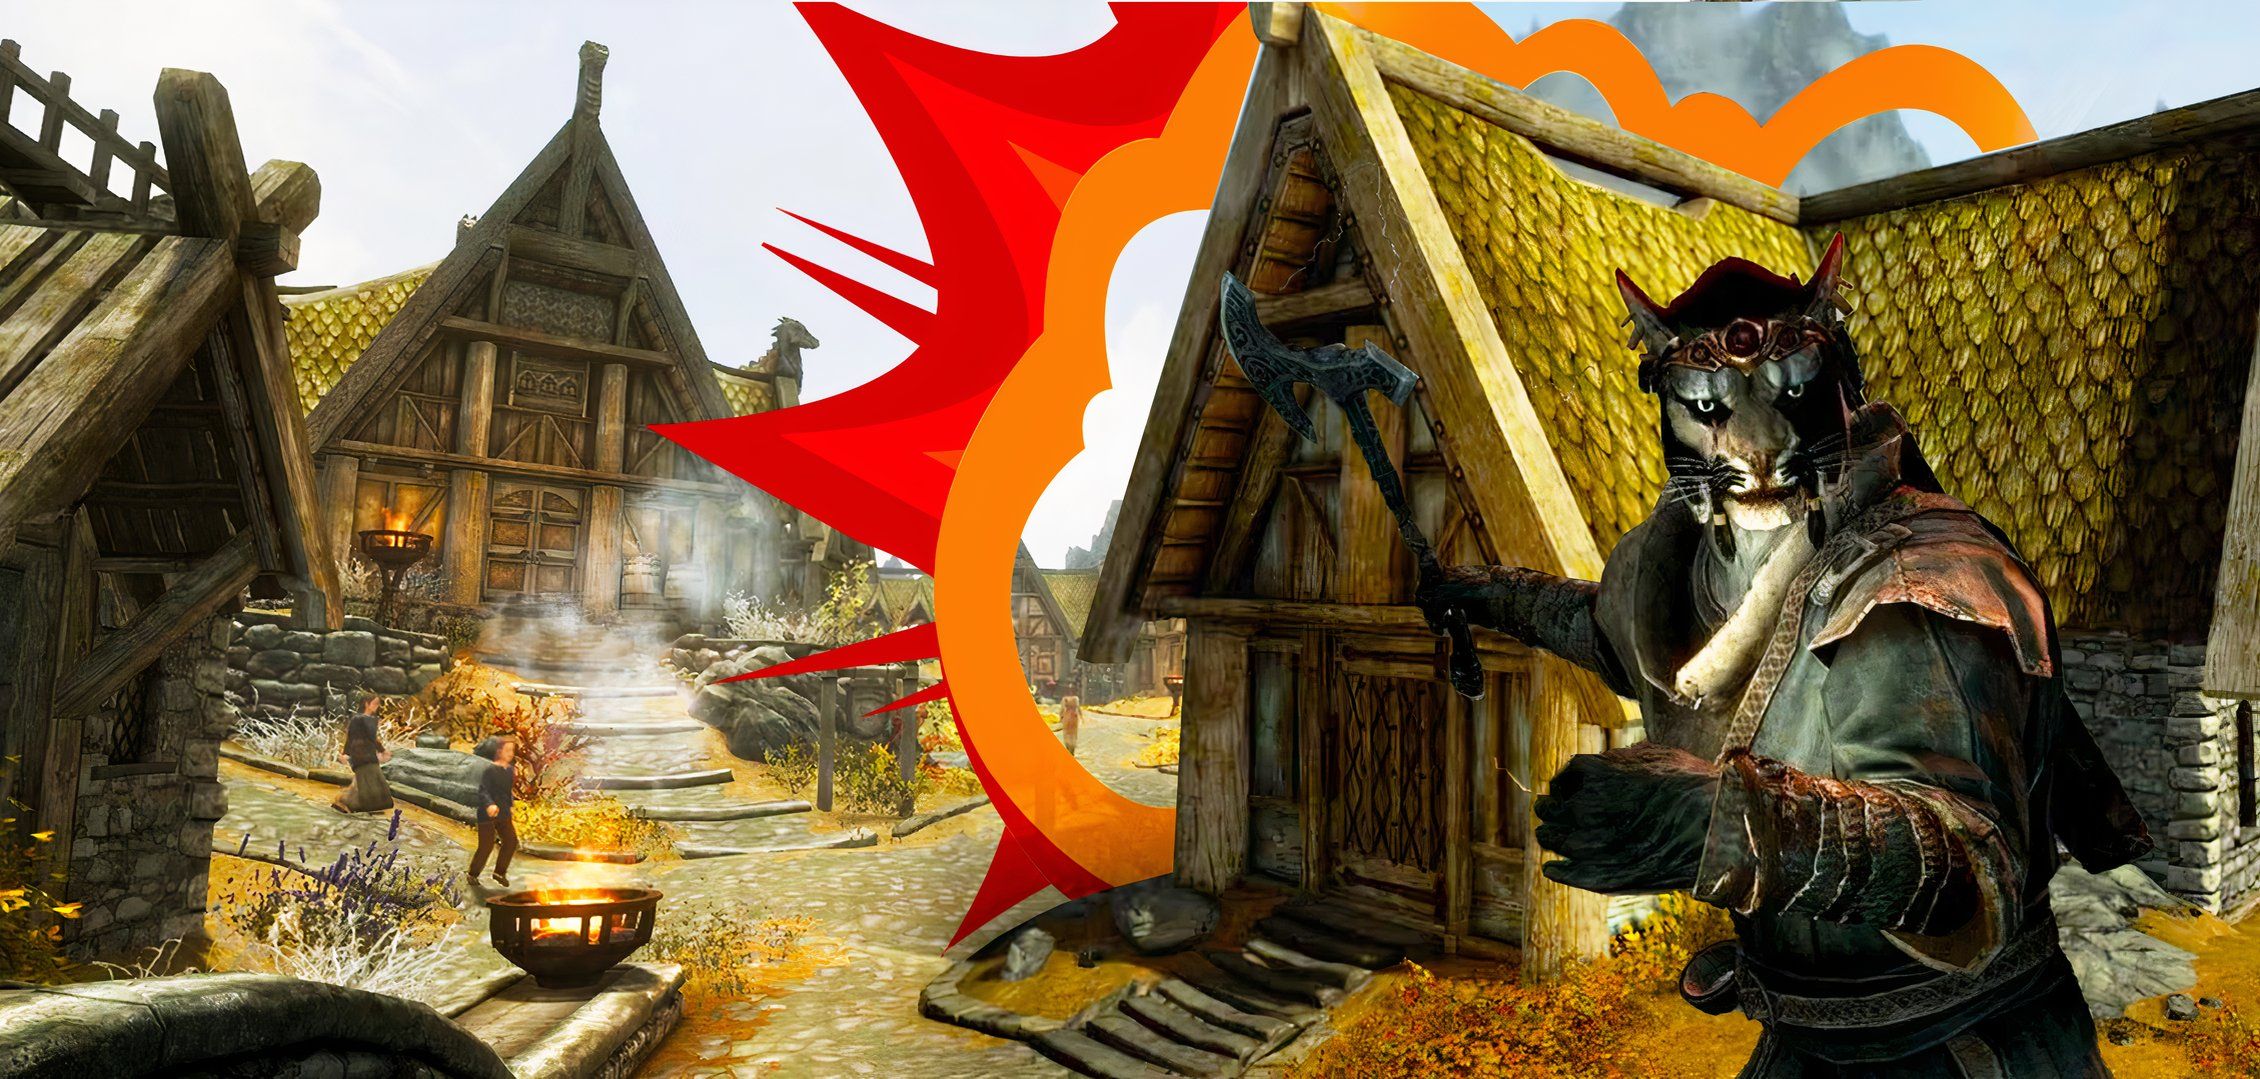 The Whiterun house with a character in front from Elder Scrolls Skyrim